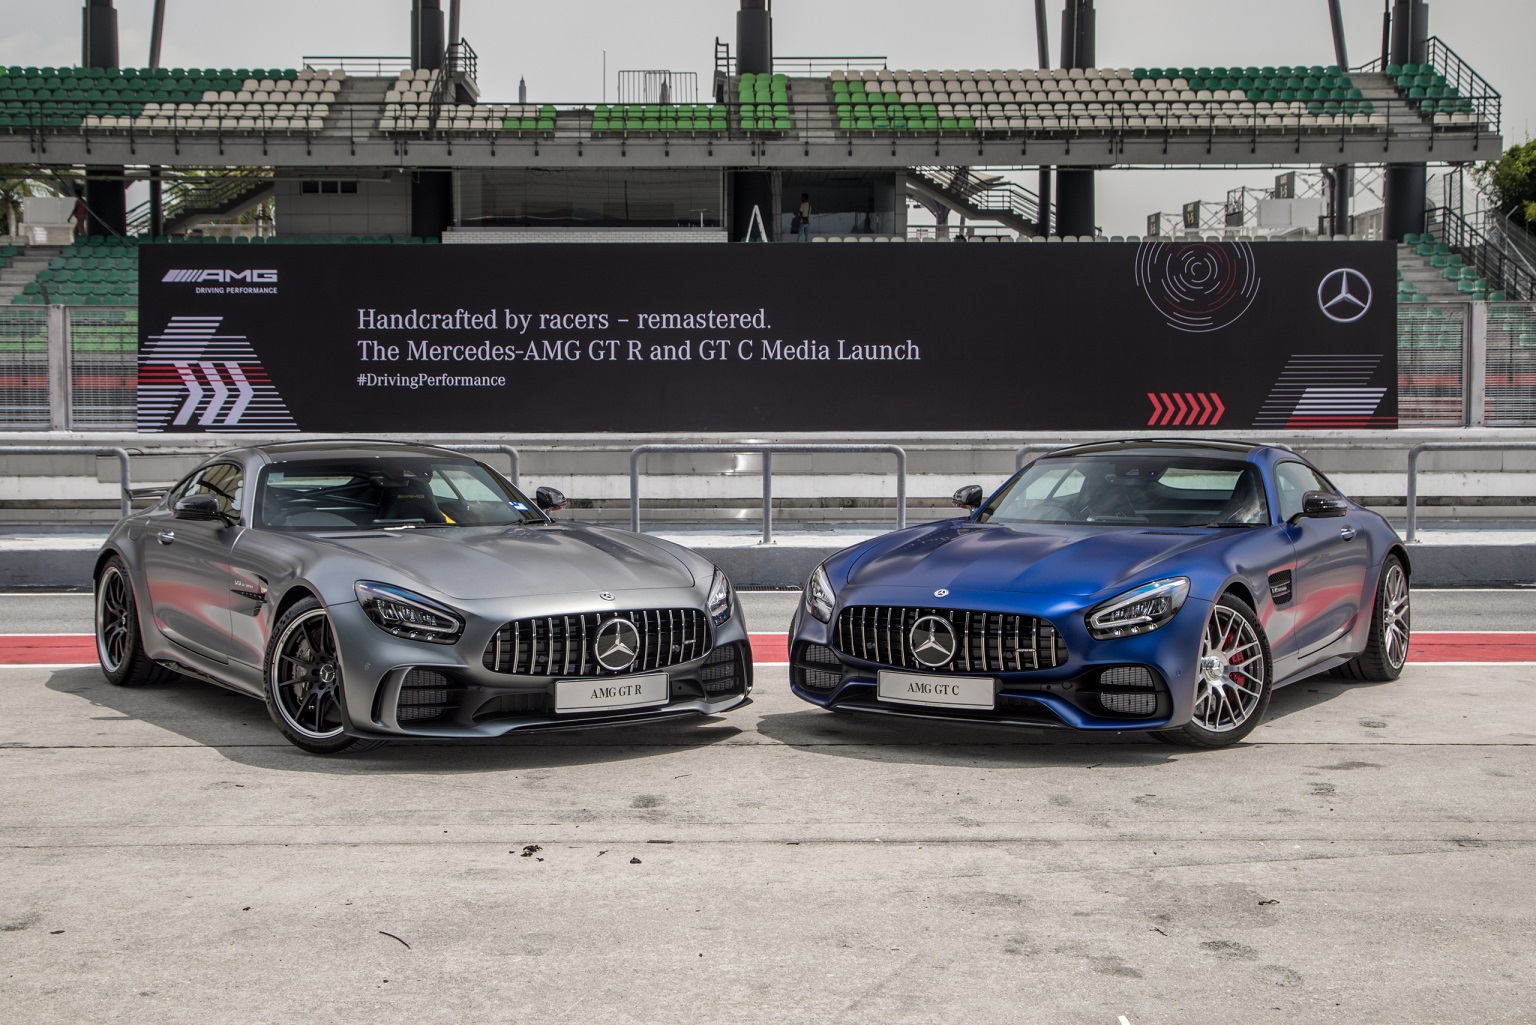 2019 Mercedes-AMG GT R and GT C uncovered in Sepang